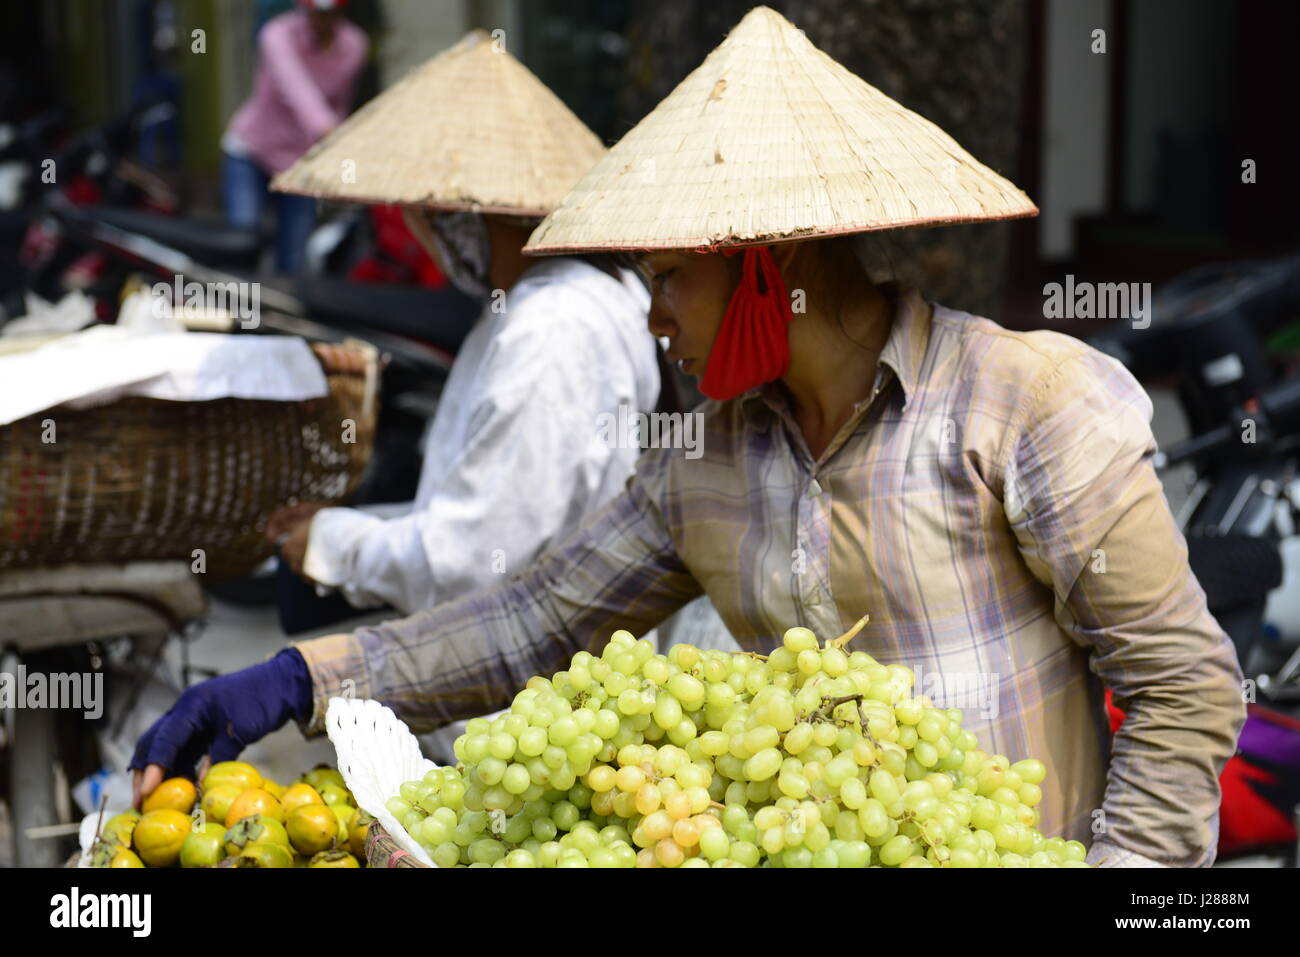 Fruit vendors come every morning with their bicycles to the colorful markets in the old city of Hanoi, Vietnam. Stock Photo